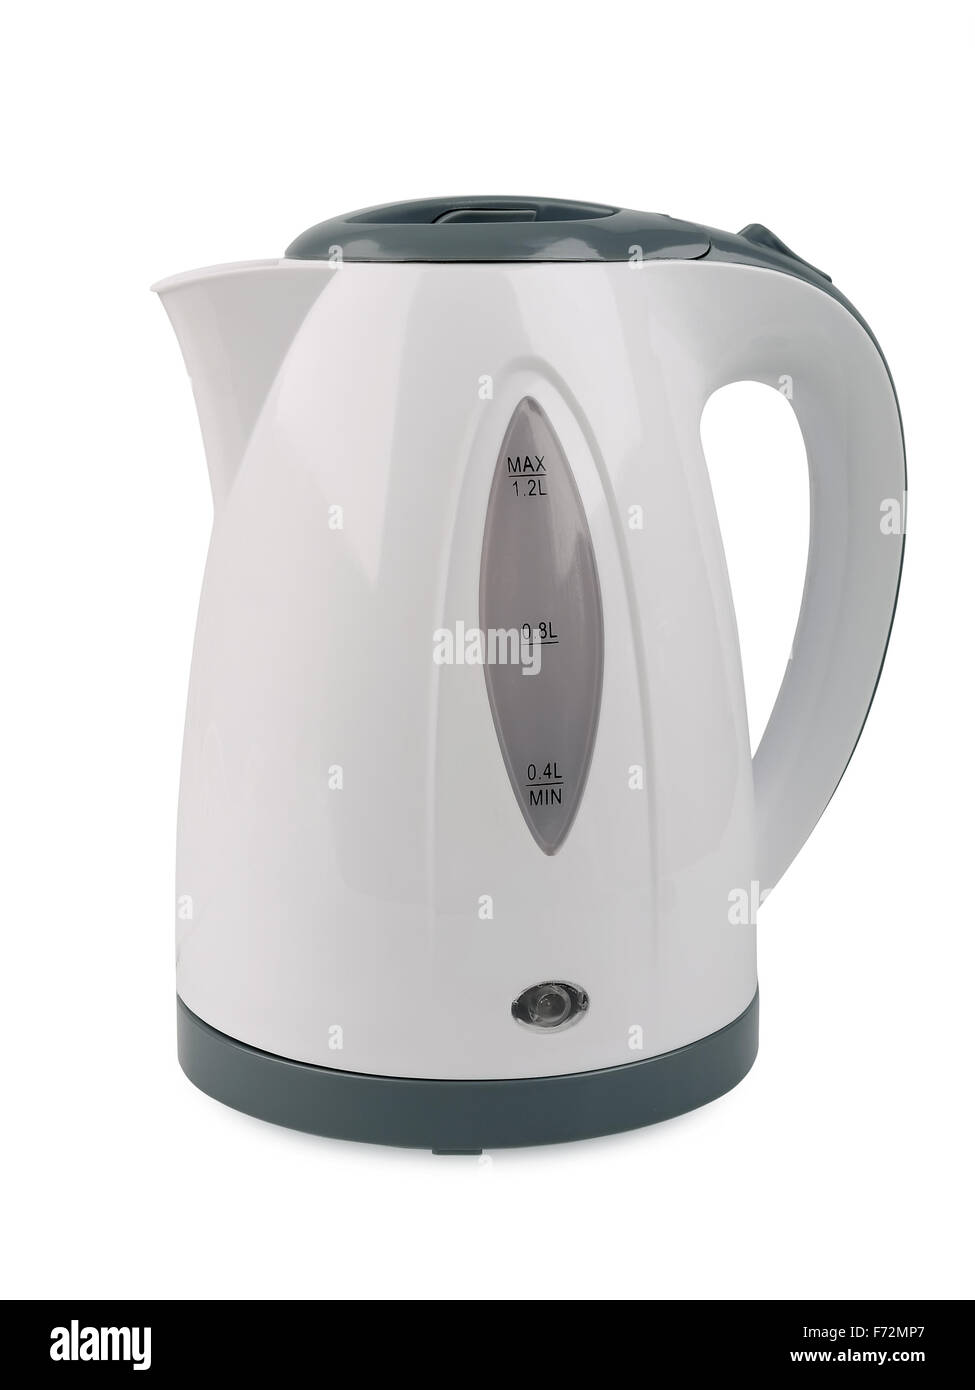 Electric kettle - Stock Image - H130/0651 - Science Photo Library